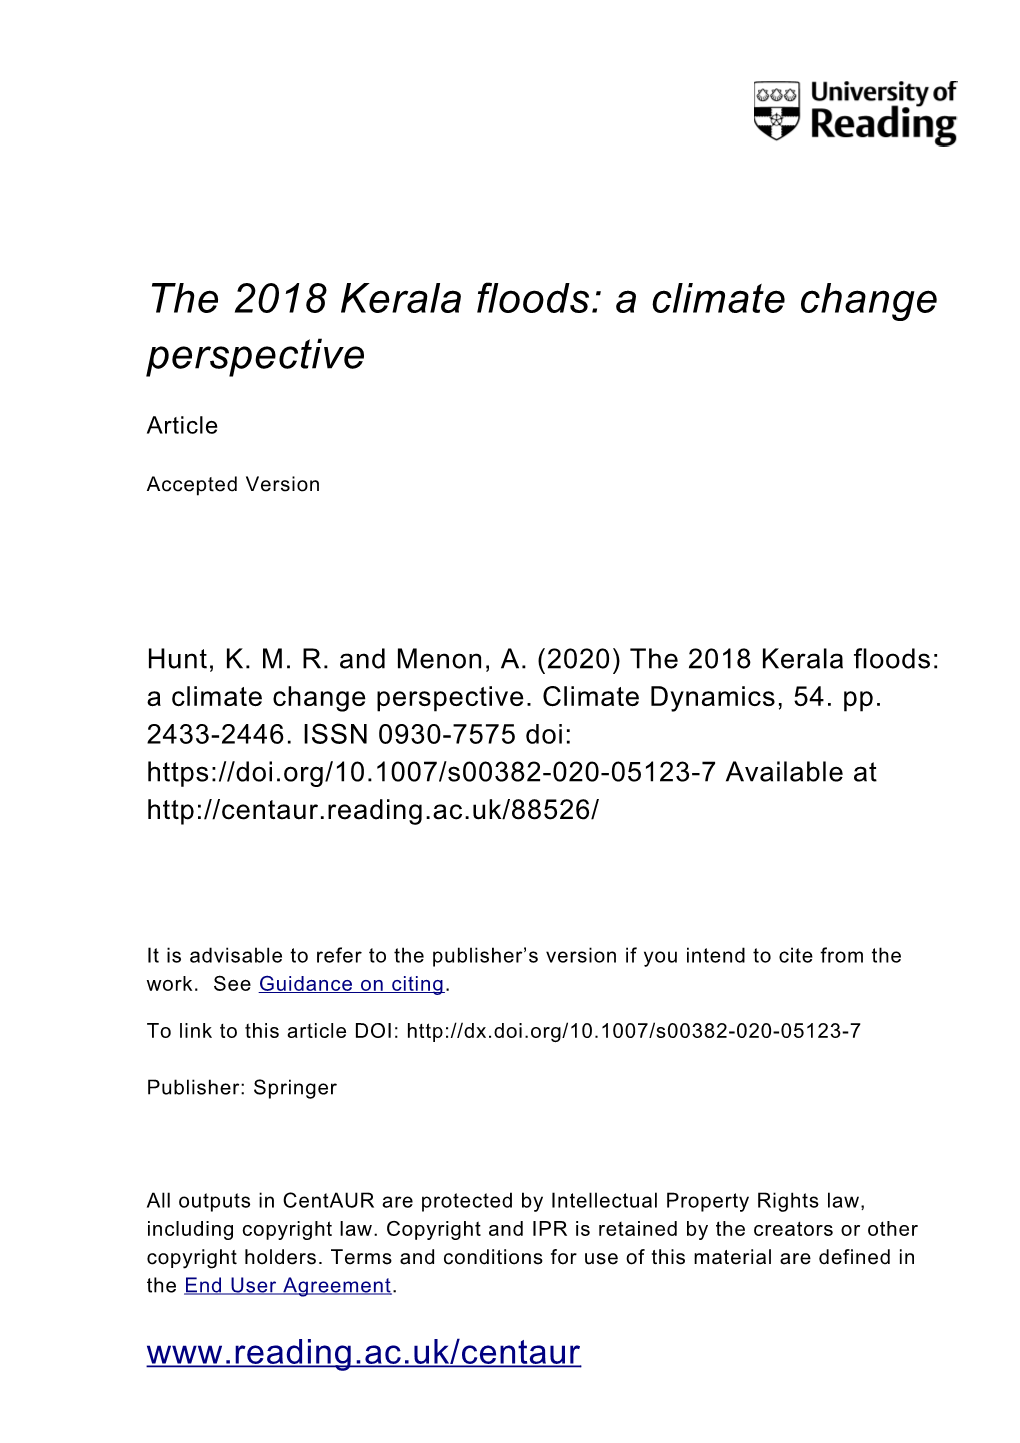 The 2018 Kerala Floods: a Climate Change Perspective